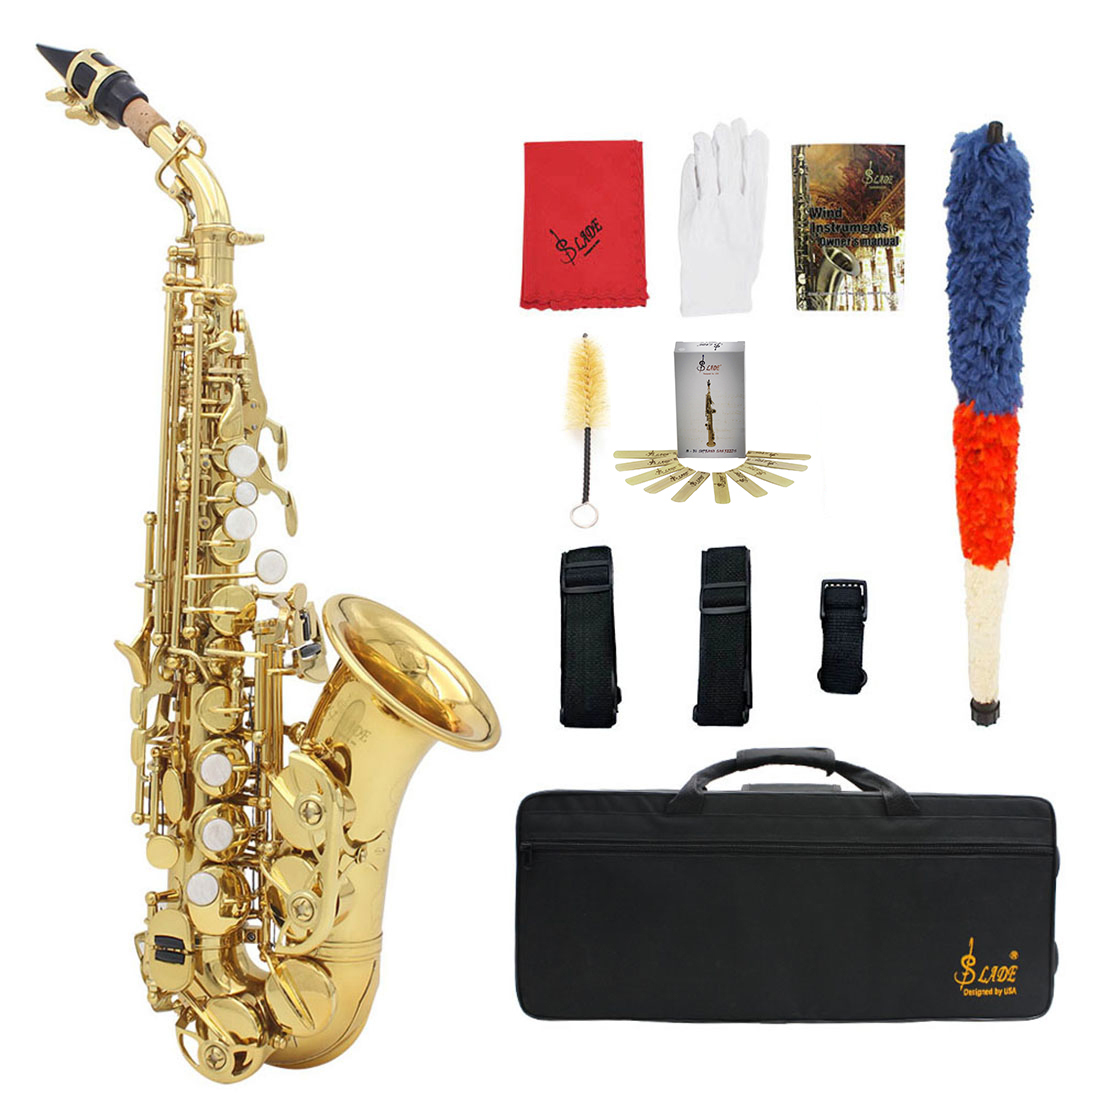 Slade Saxophone Alto Instrument E Fall Saxophone for Beginner with Cleaning Accessories - Photo: 8